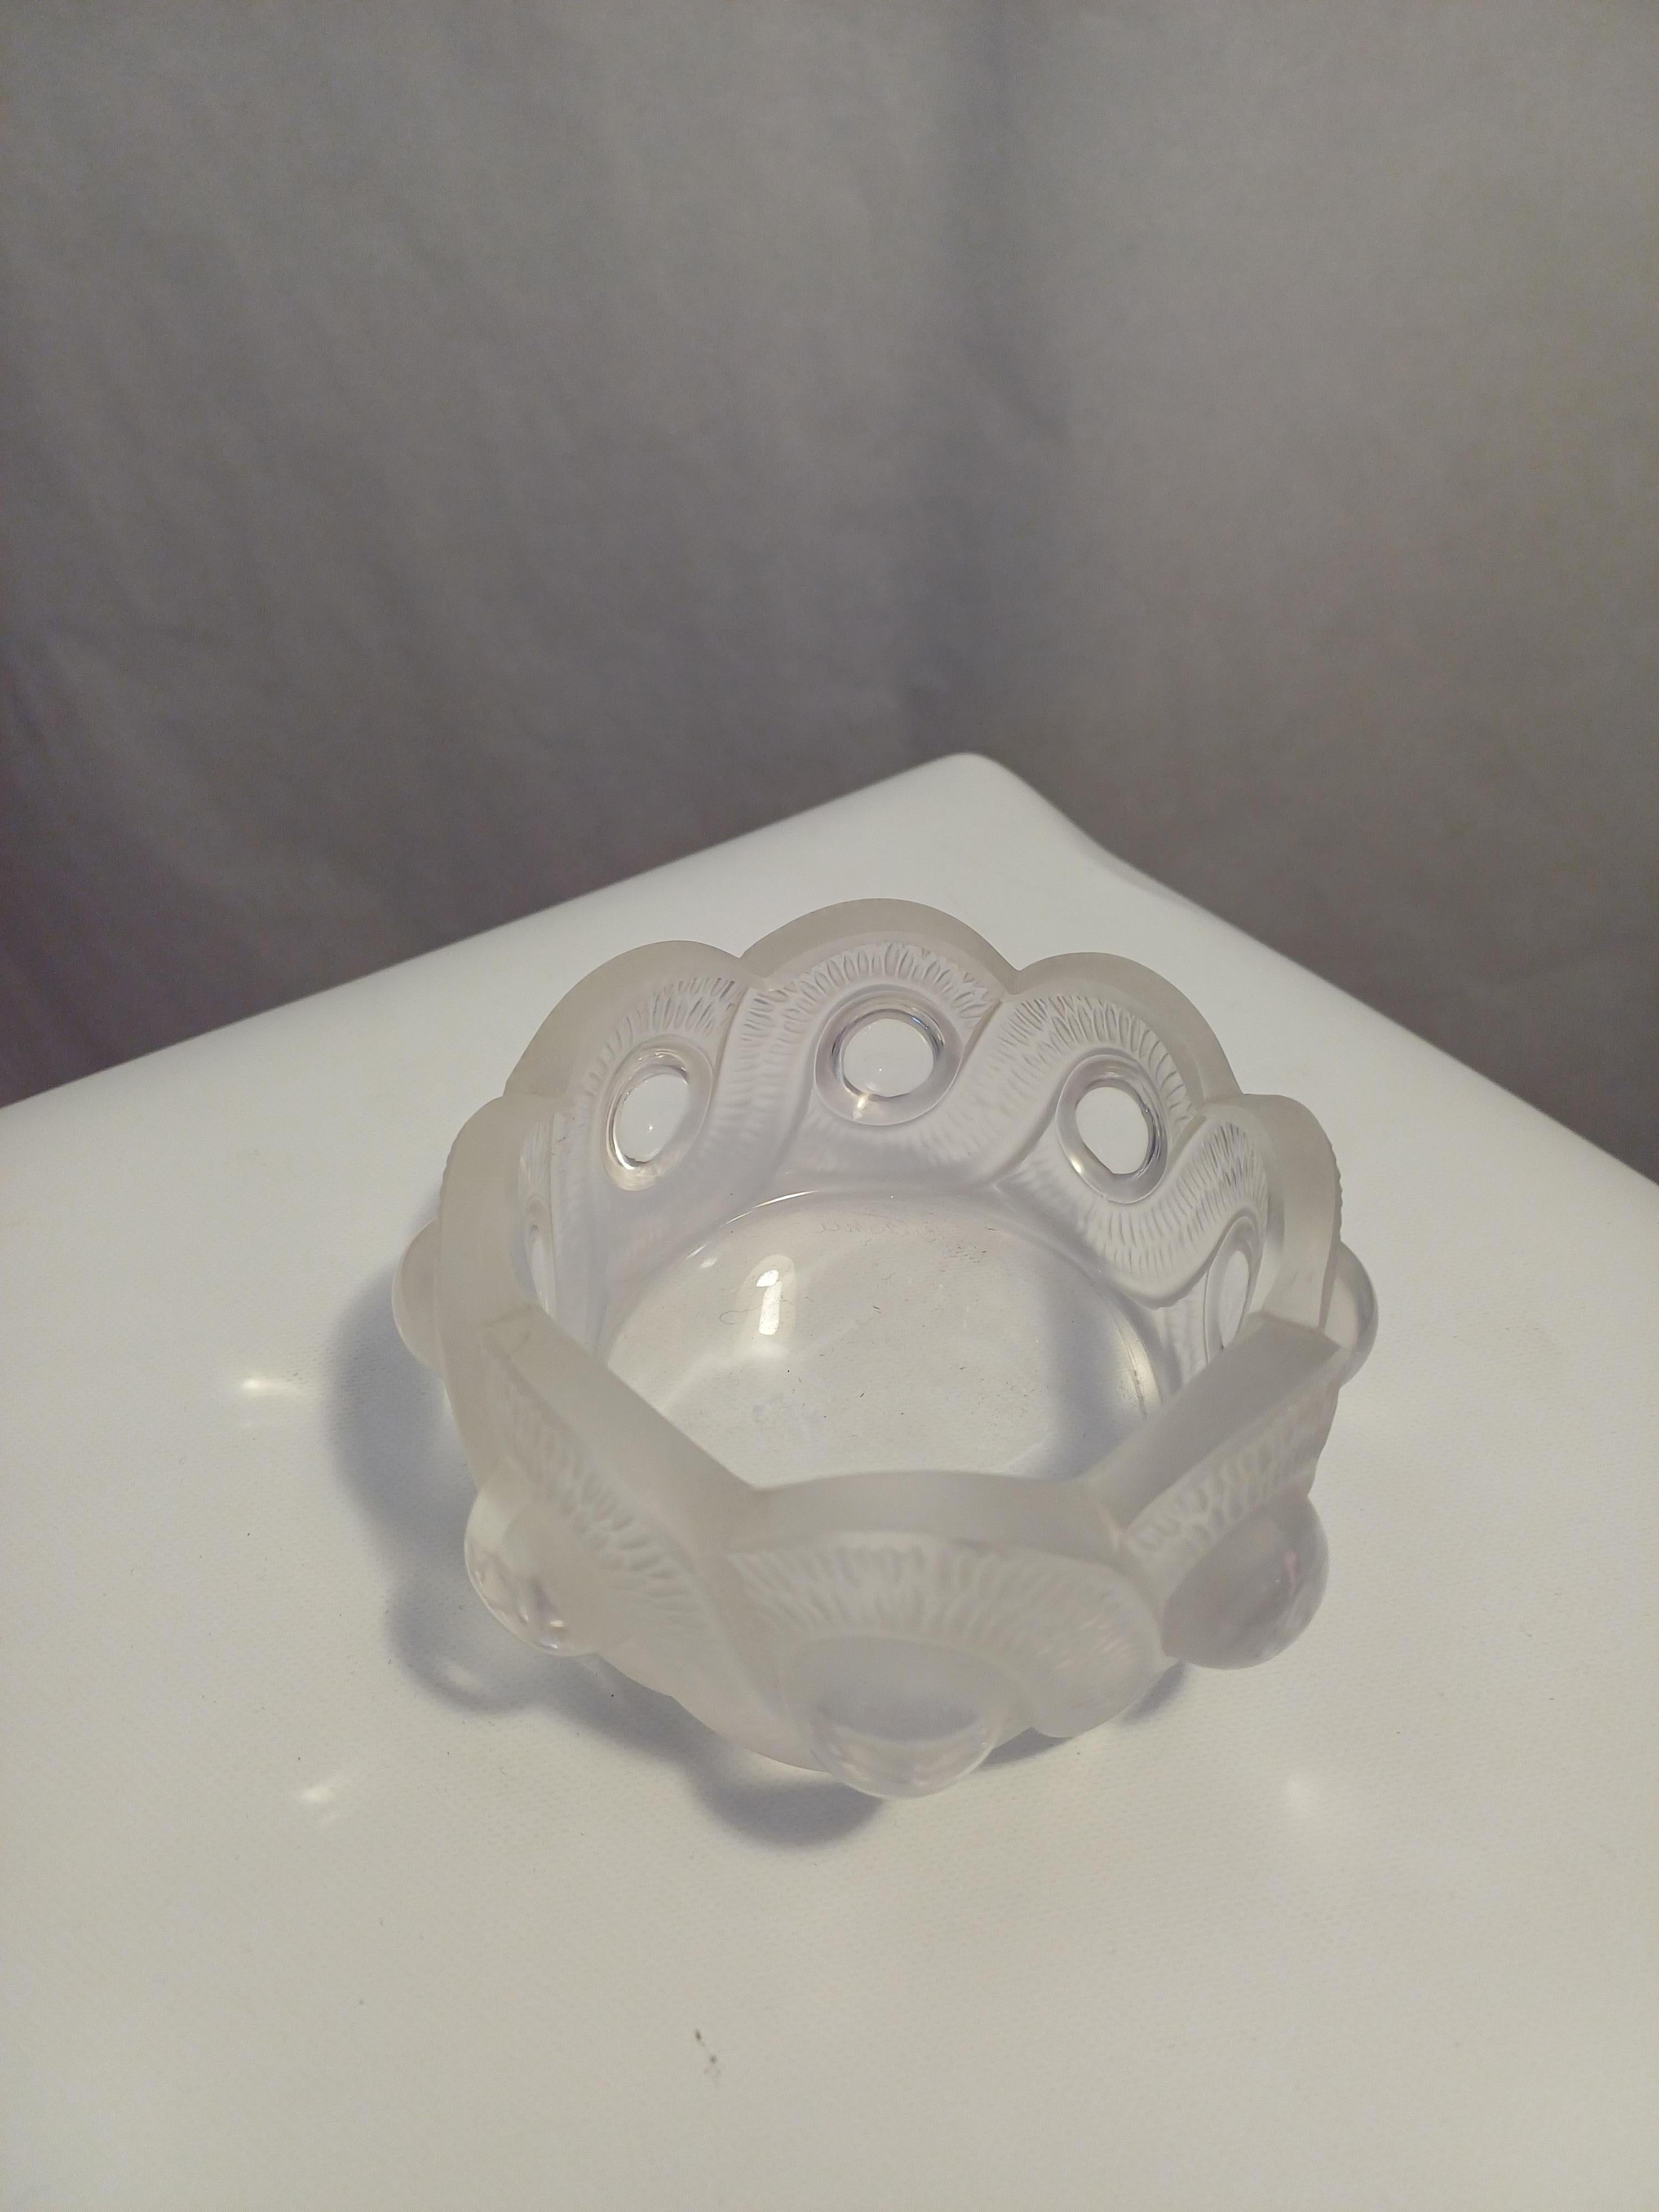 Elegant Lalique crystal ashtray, Signed at the base Lalique.
Mint condition.
Measures diameter 10 cm height 5 cm.